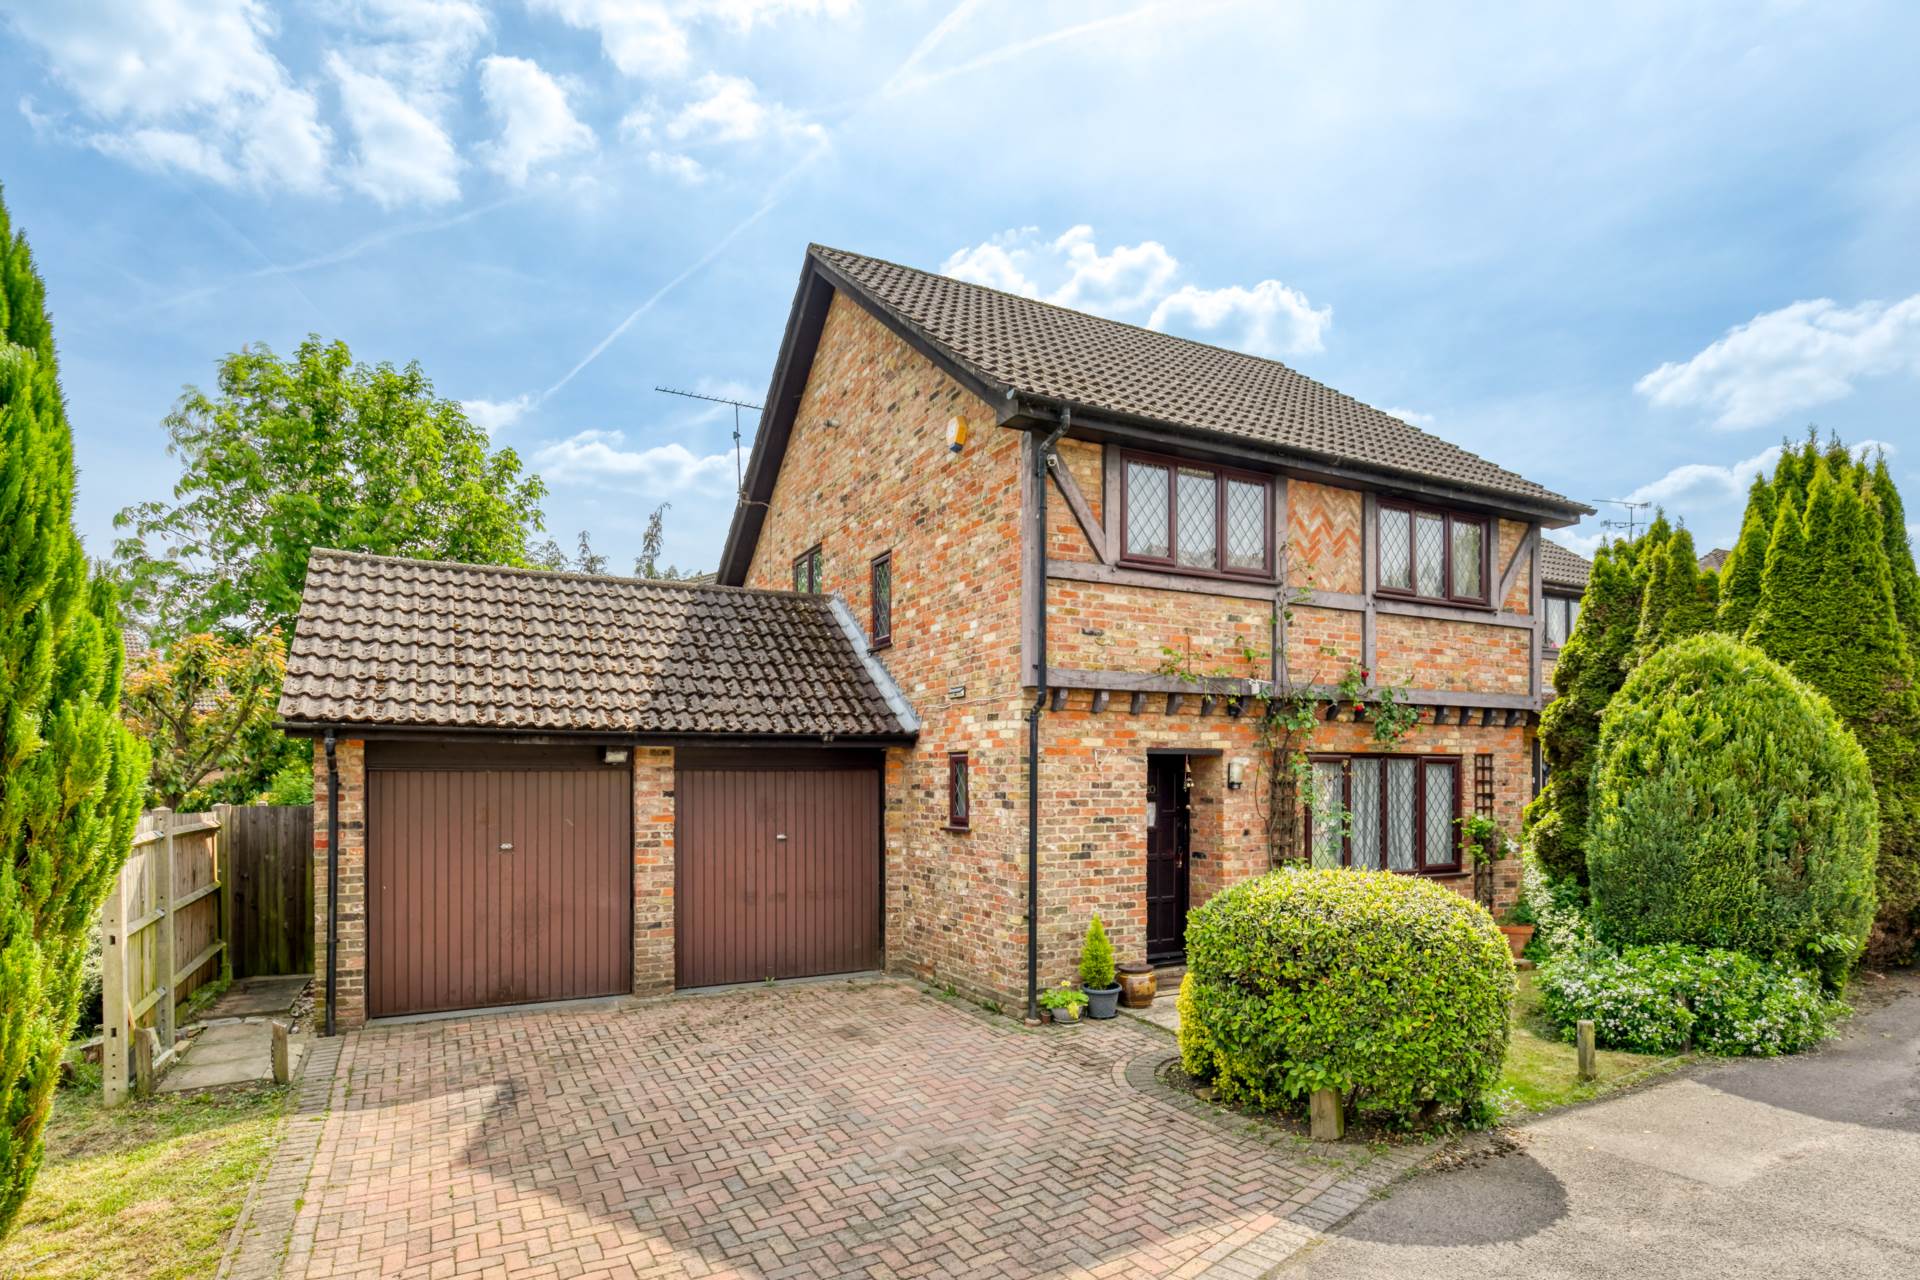 4 bed Detached House for rent in Bracknell. From Sears Property - Bracknell